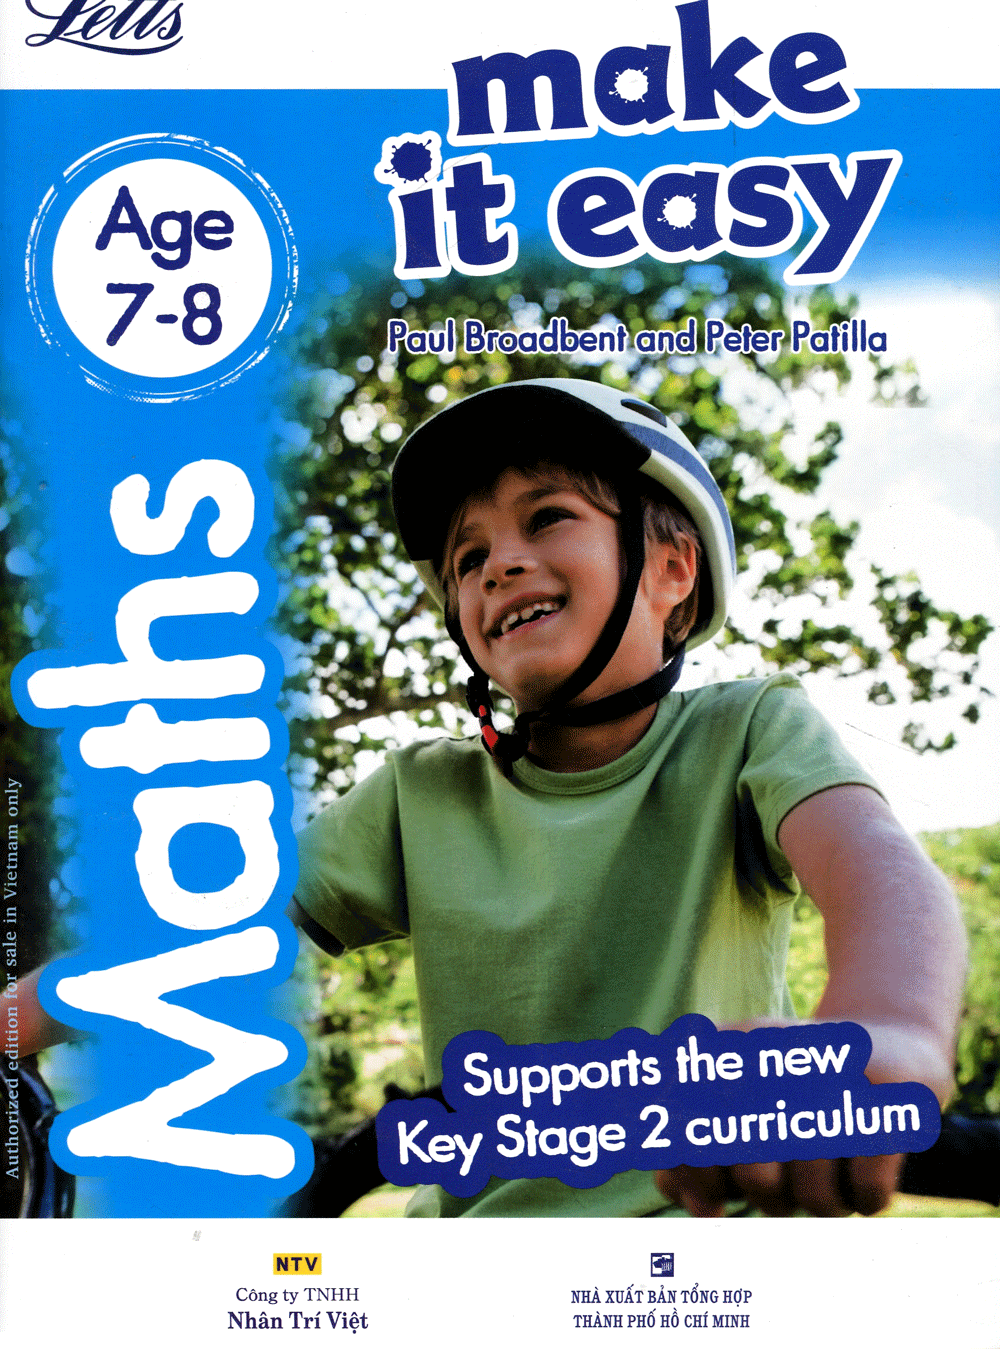 Letts Make It Easy - Maths (Age 7-8)